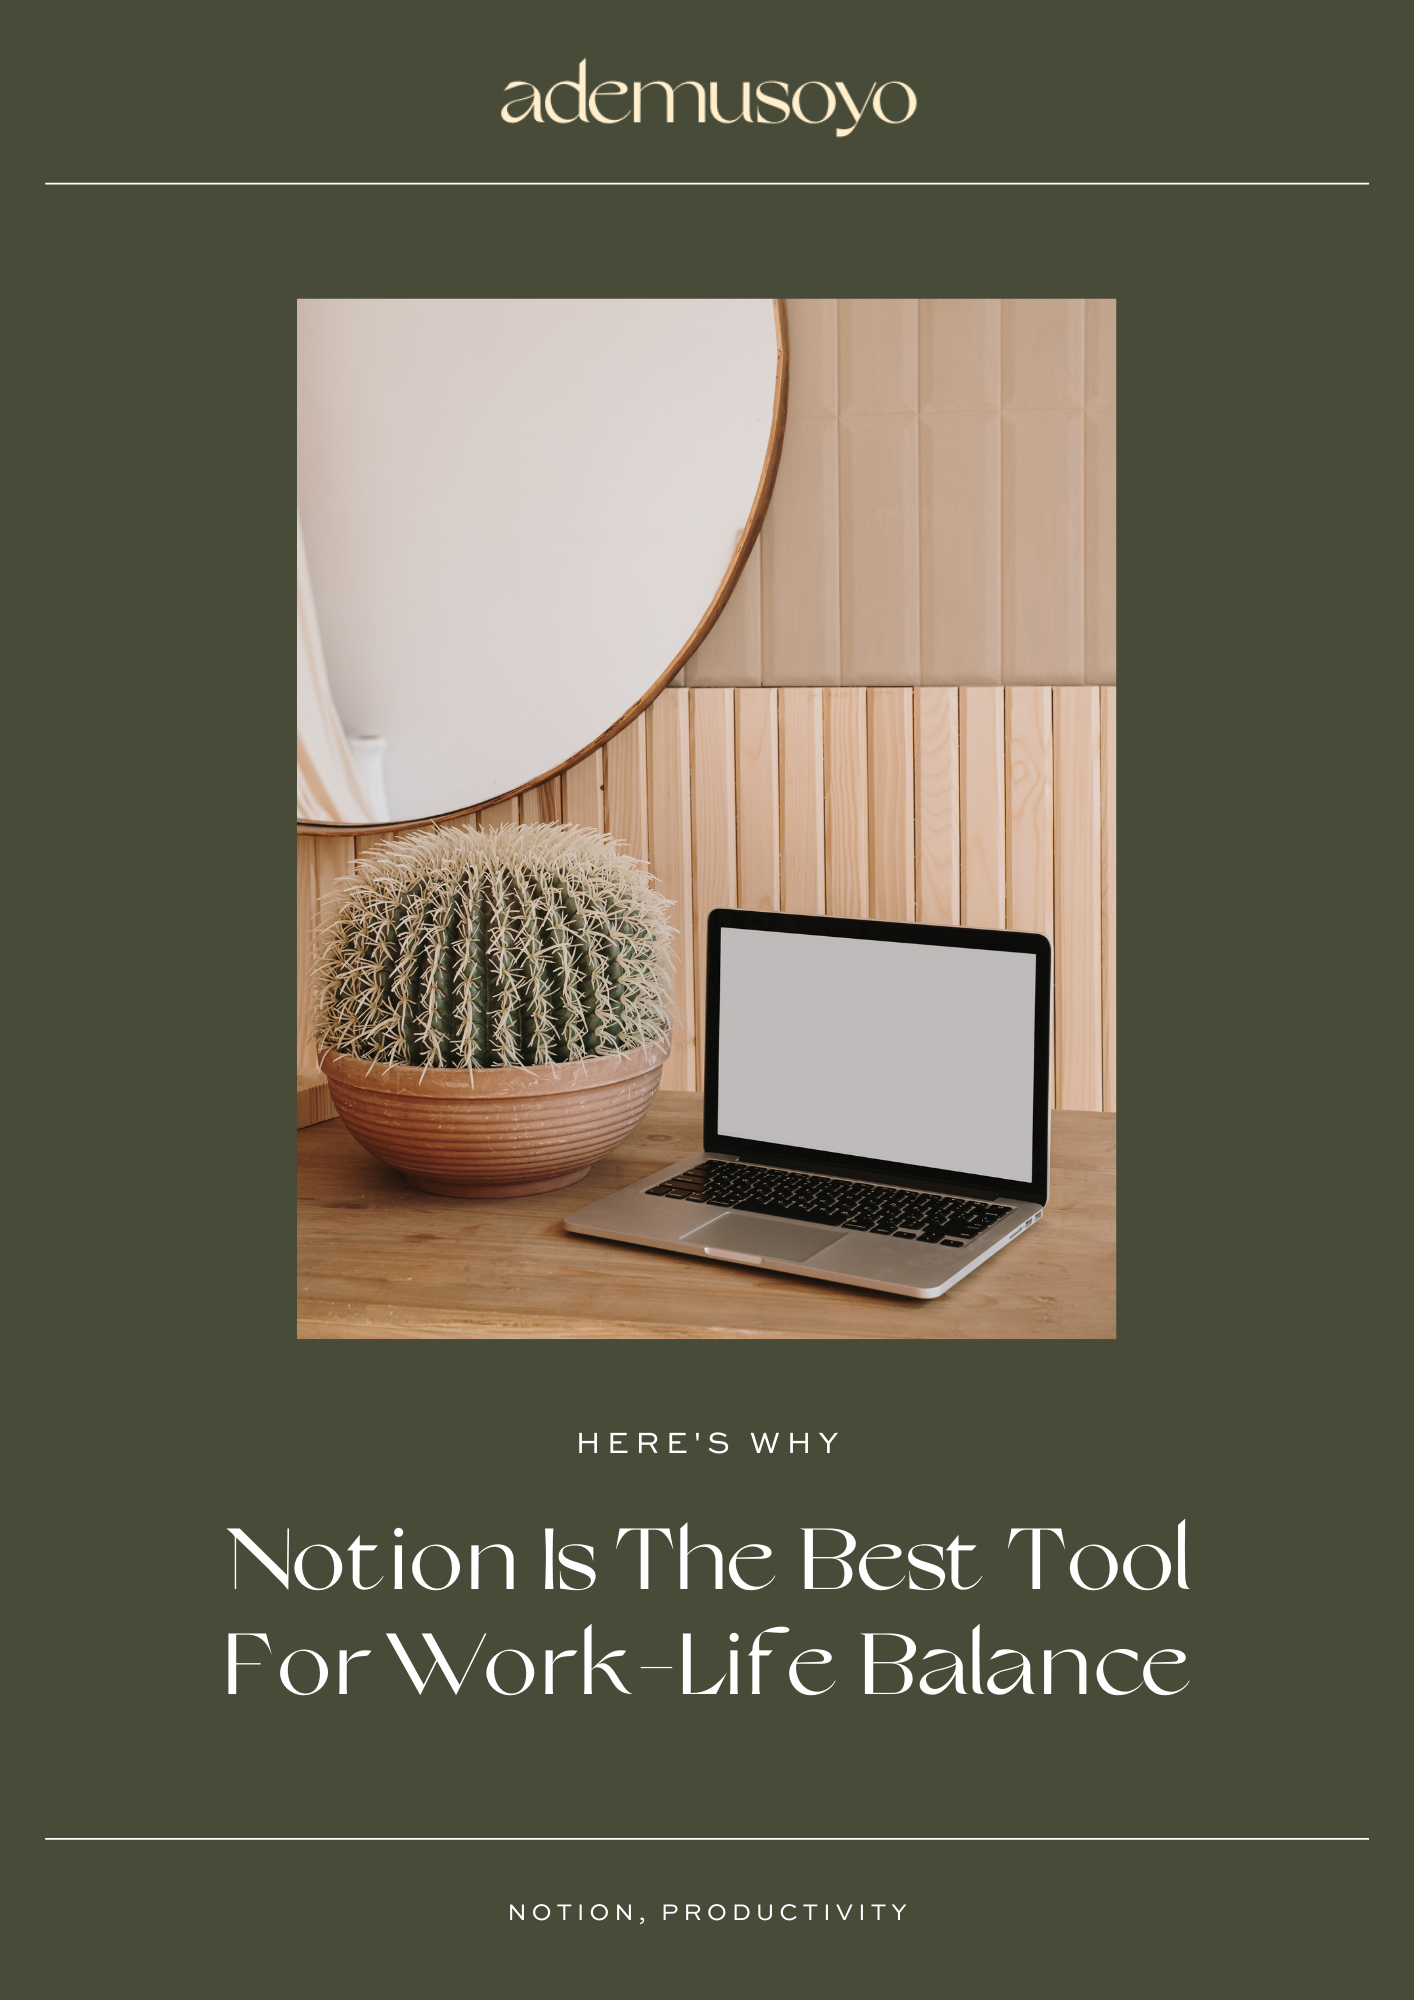 Why Notion is the Best Tool for Work-Life Balance